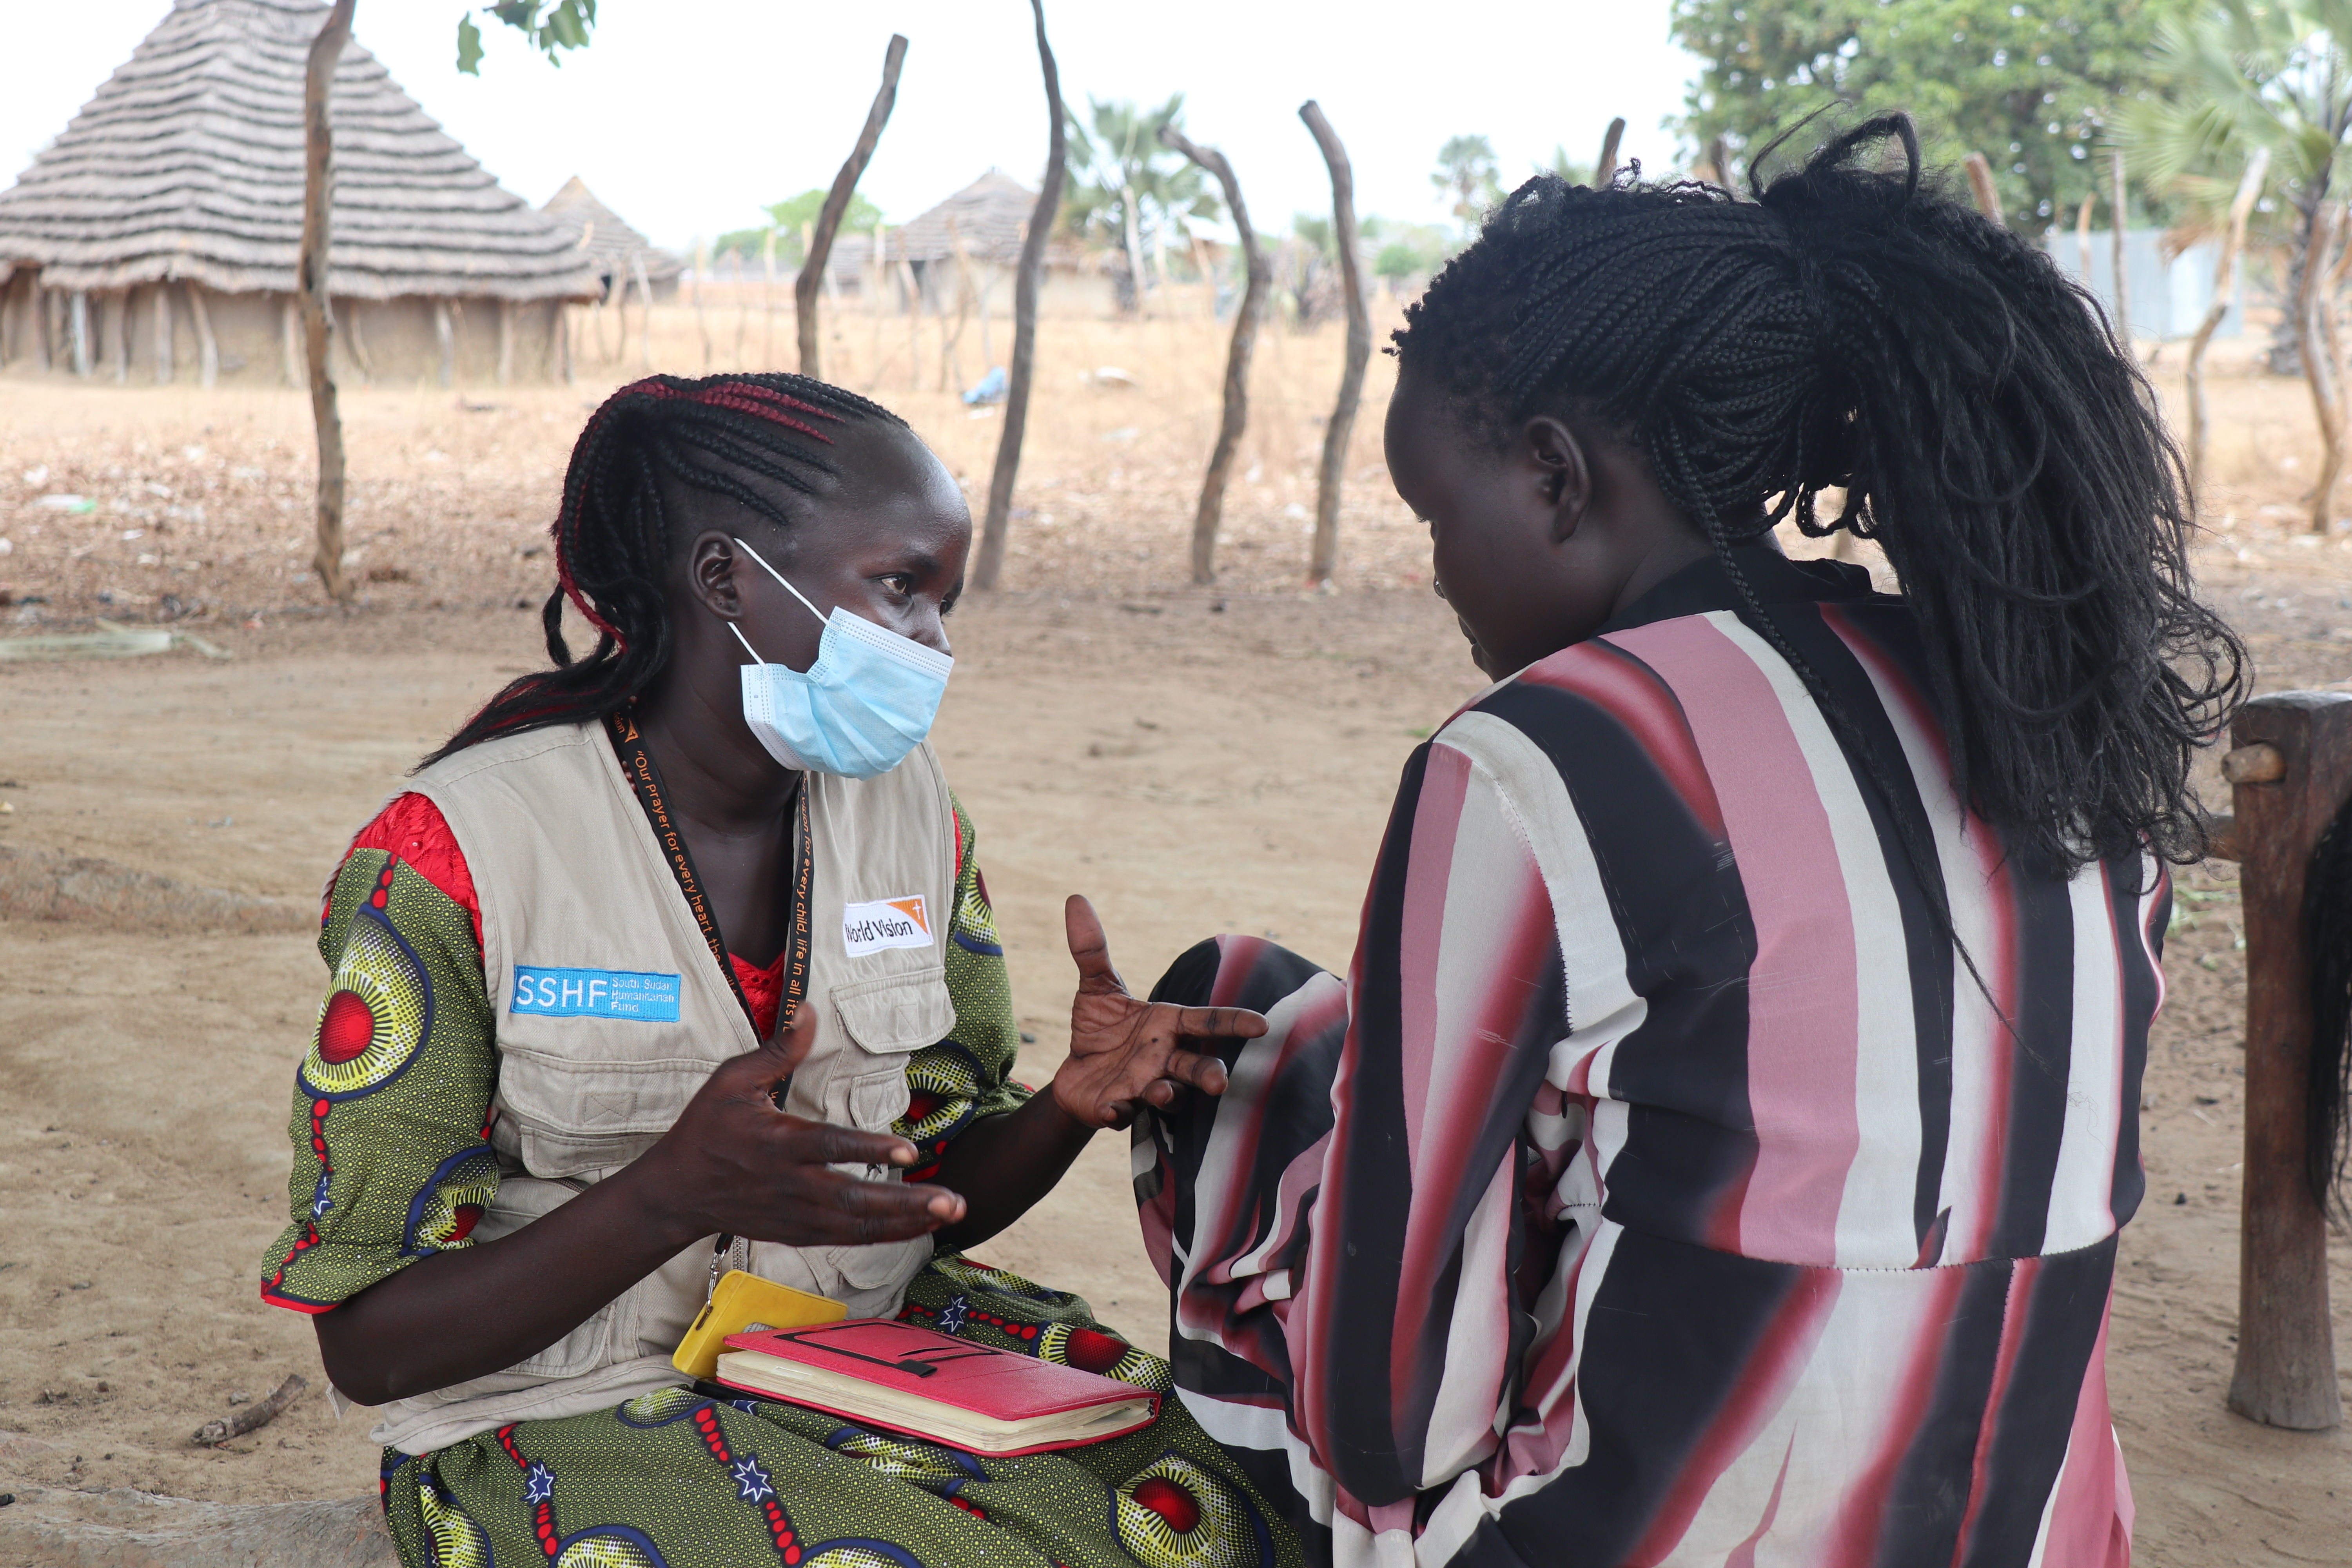 World Vision’s social worker Pasquina Diu talks with South Sudanese girl Katina on one of her visits.